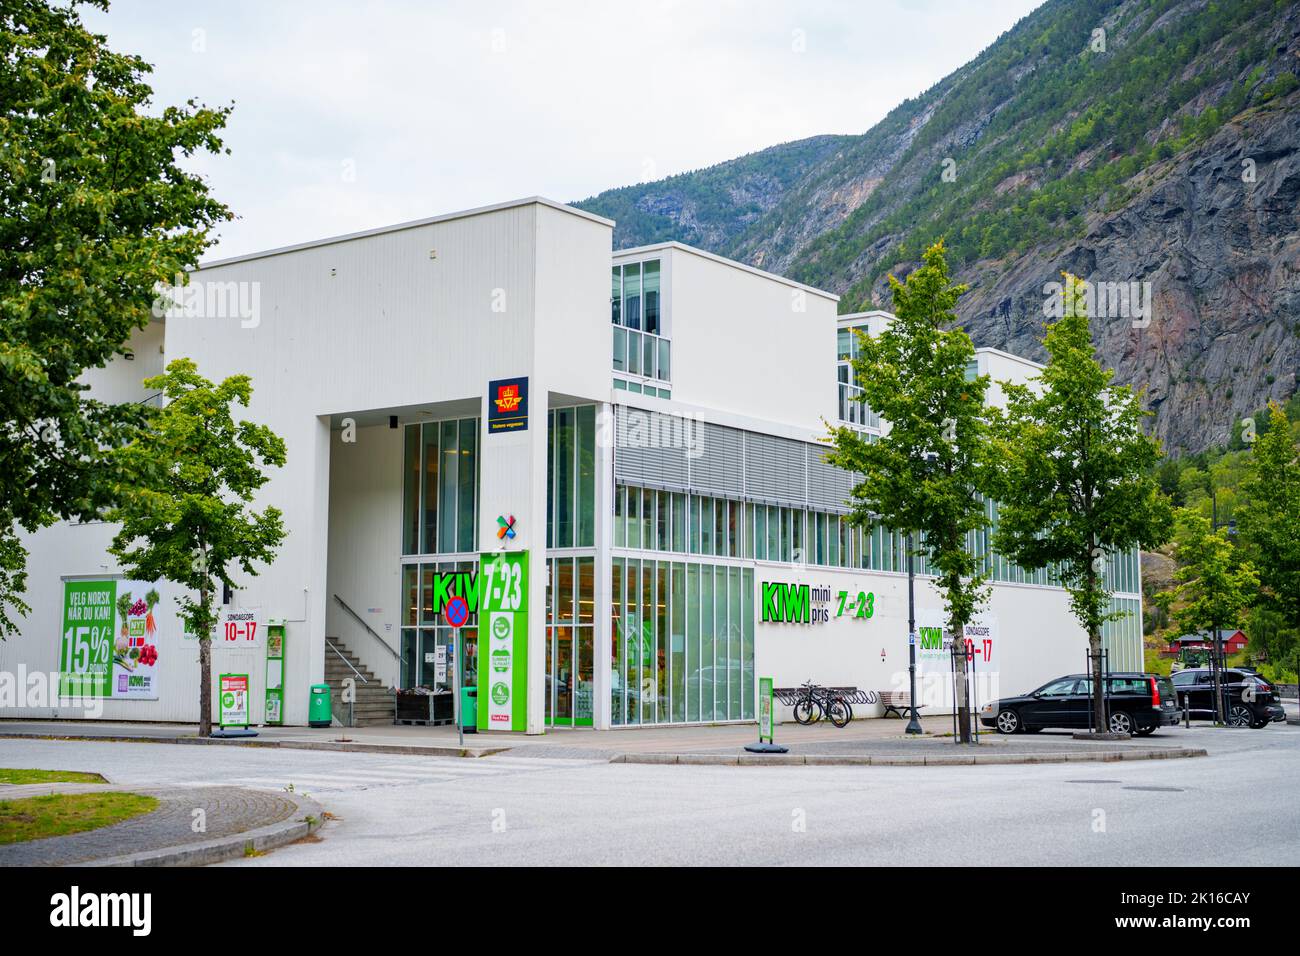 Photo of a Kiwi mini grocery store in Lærdal, Norway Stock Photo